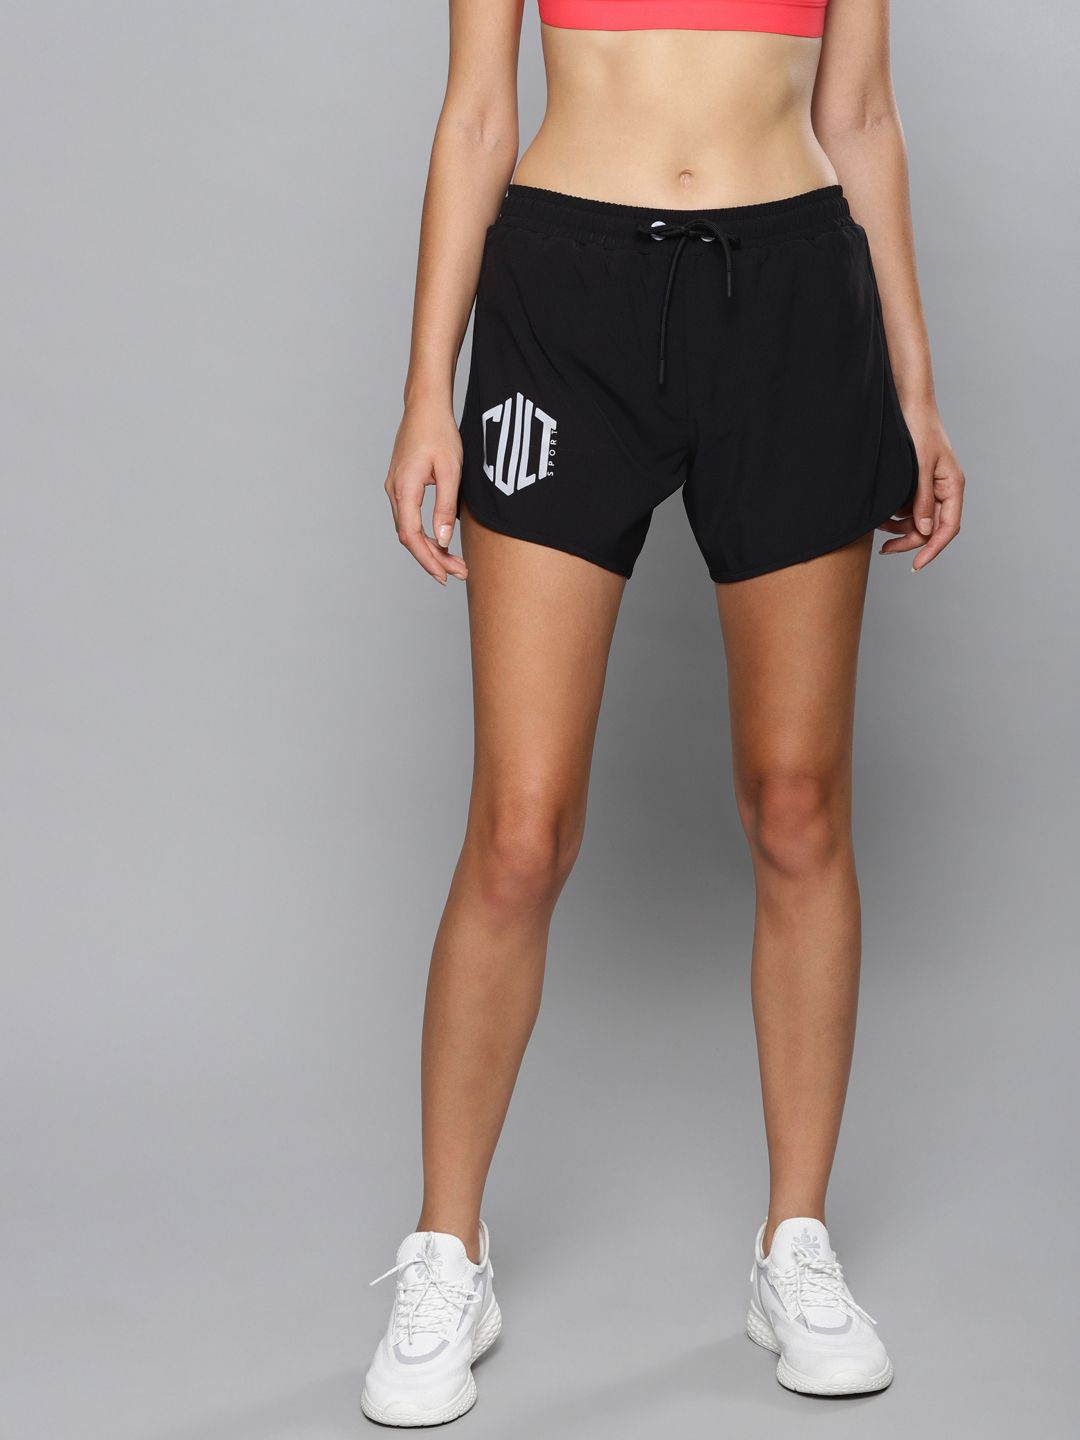 Cultsport Women Black Solid Fly Dry Regular Fit Sports Running Shorts Price in India